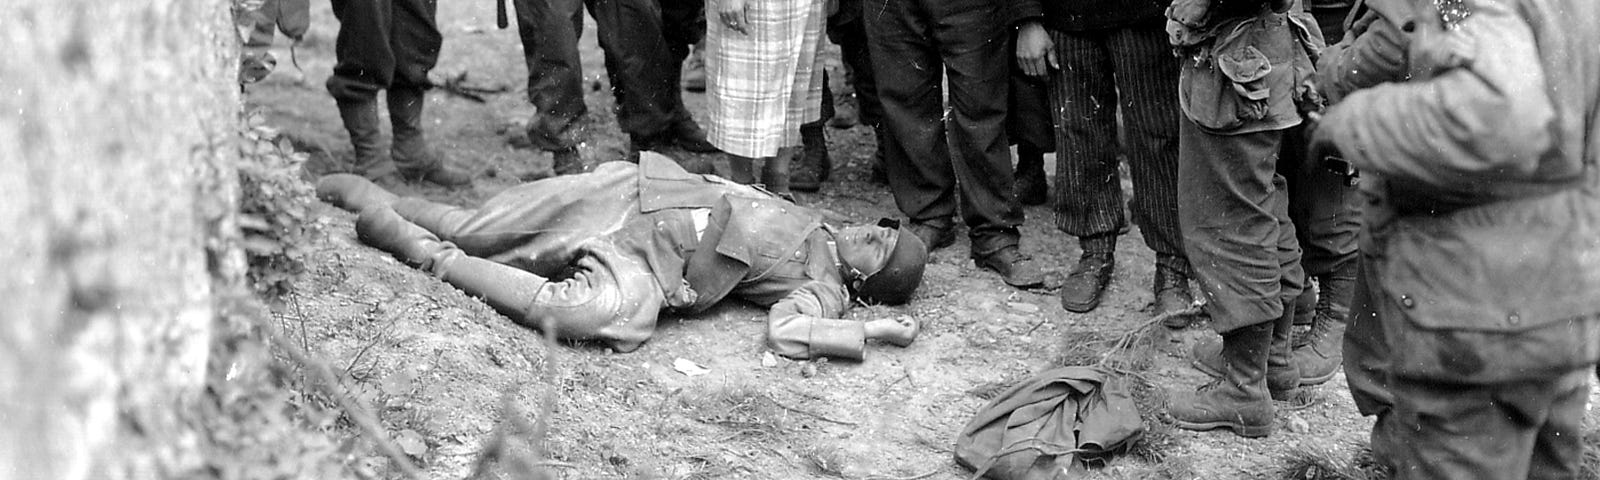 French civilians greet American invasion forces. A dead German lies at their feet, ignored.